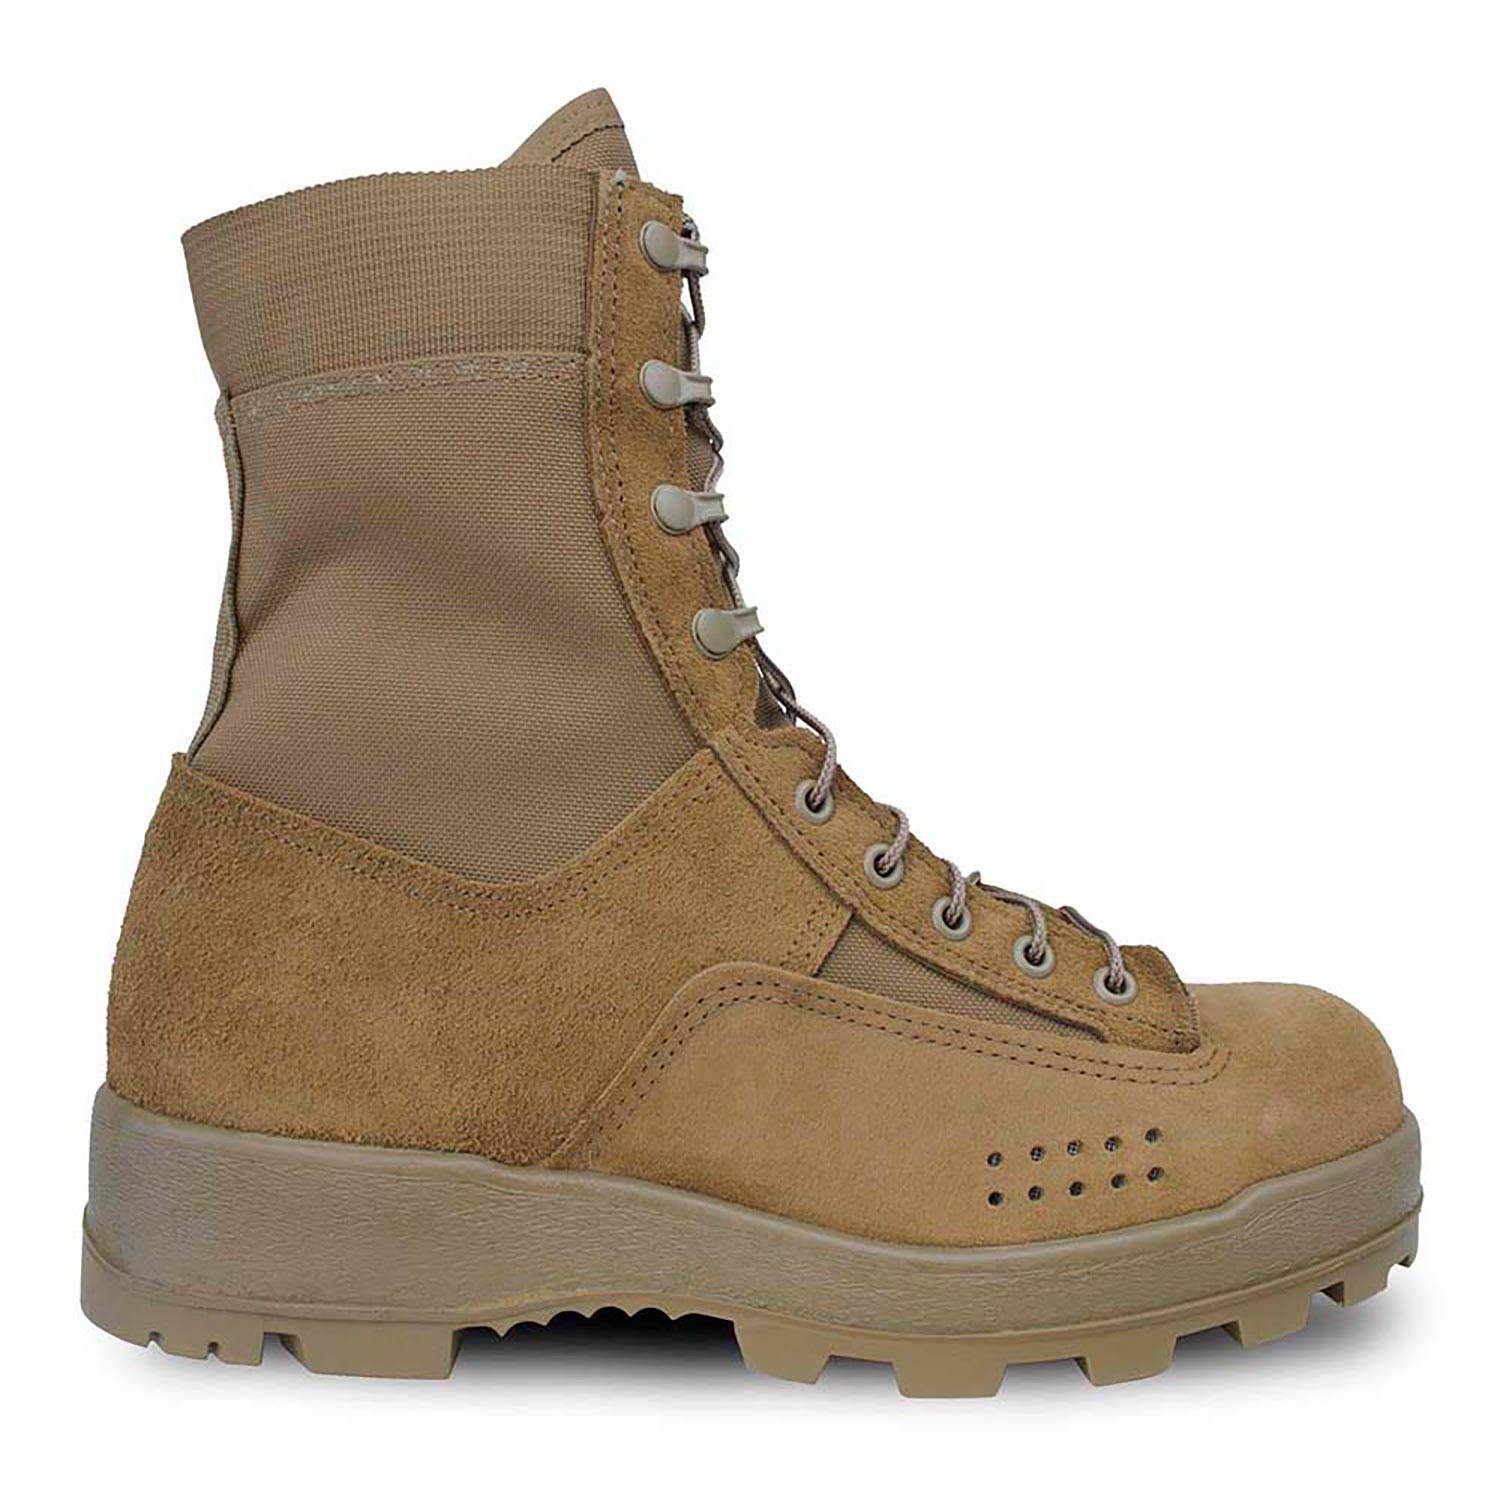 McRae JBII Army Hot Weather Jungle Boots | OCP Boots